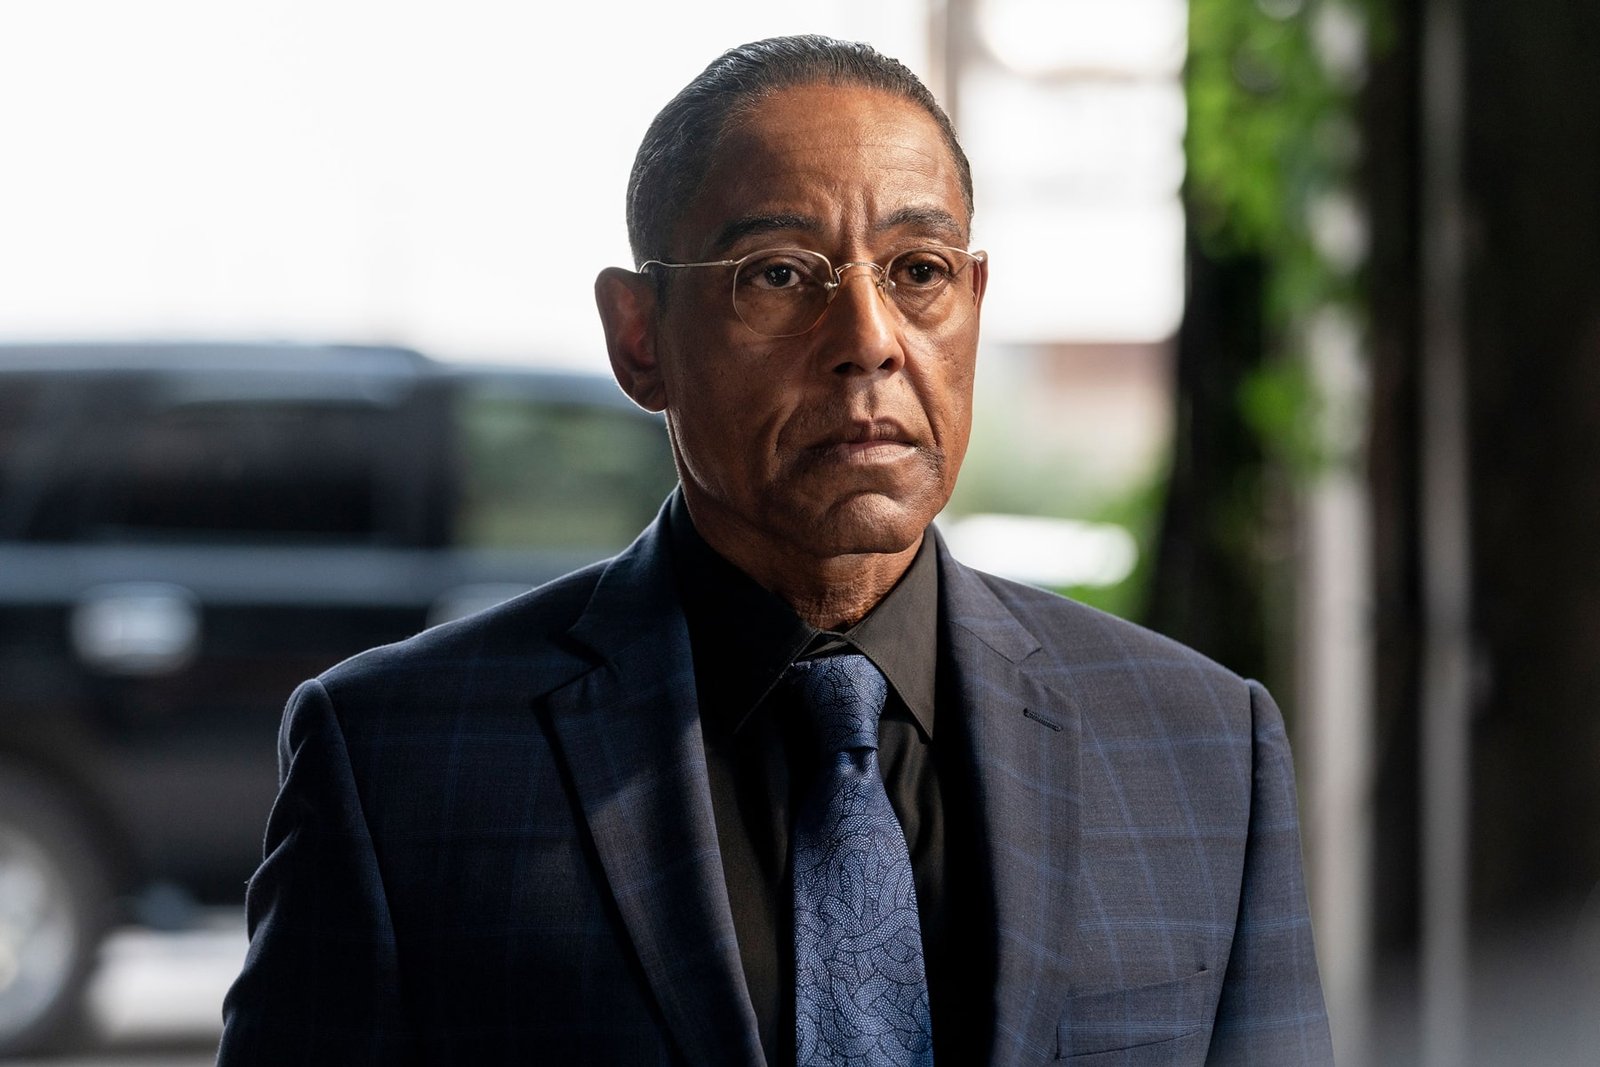 Better Call Saul Cast - Giancarlo Esposito as Gus Fring